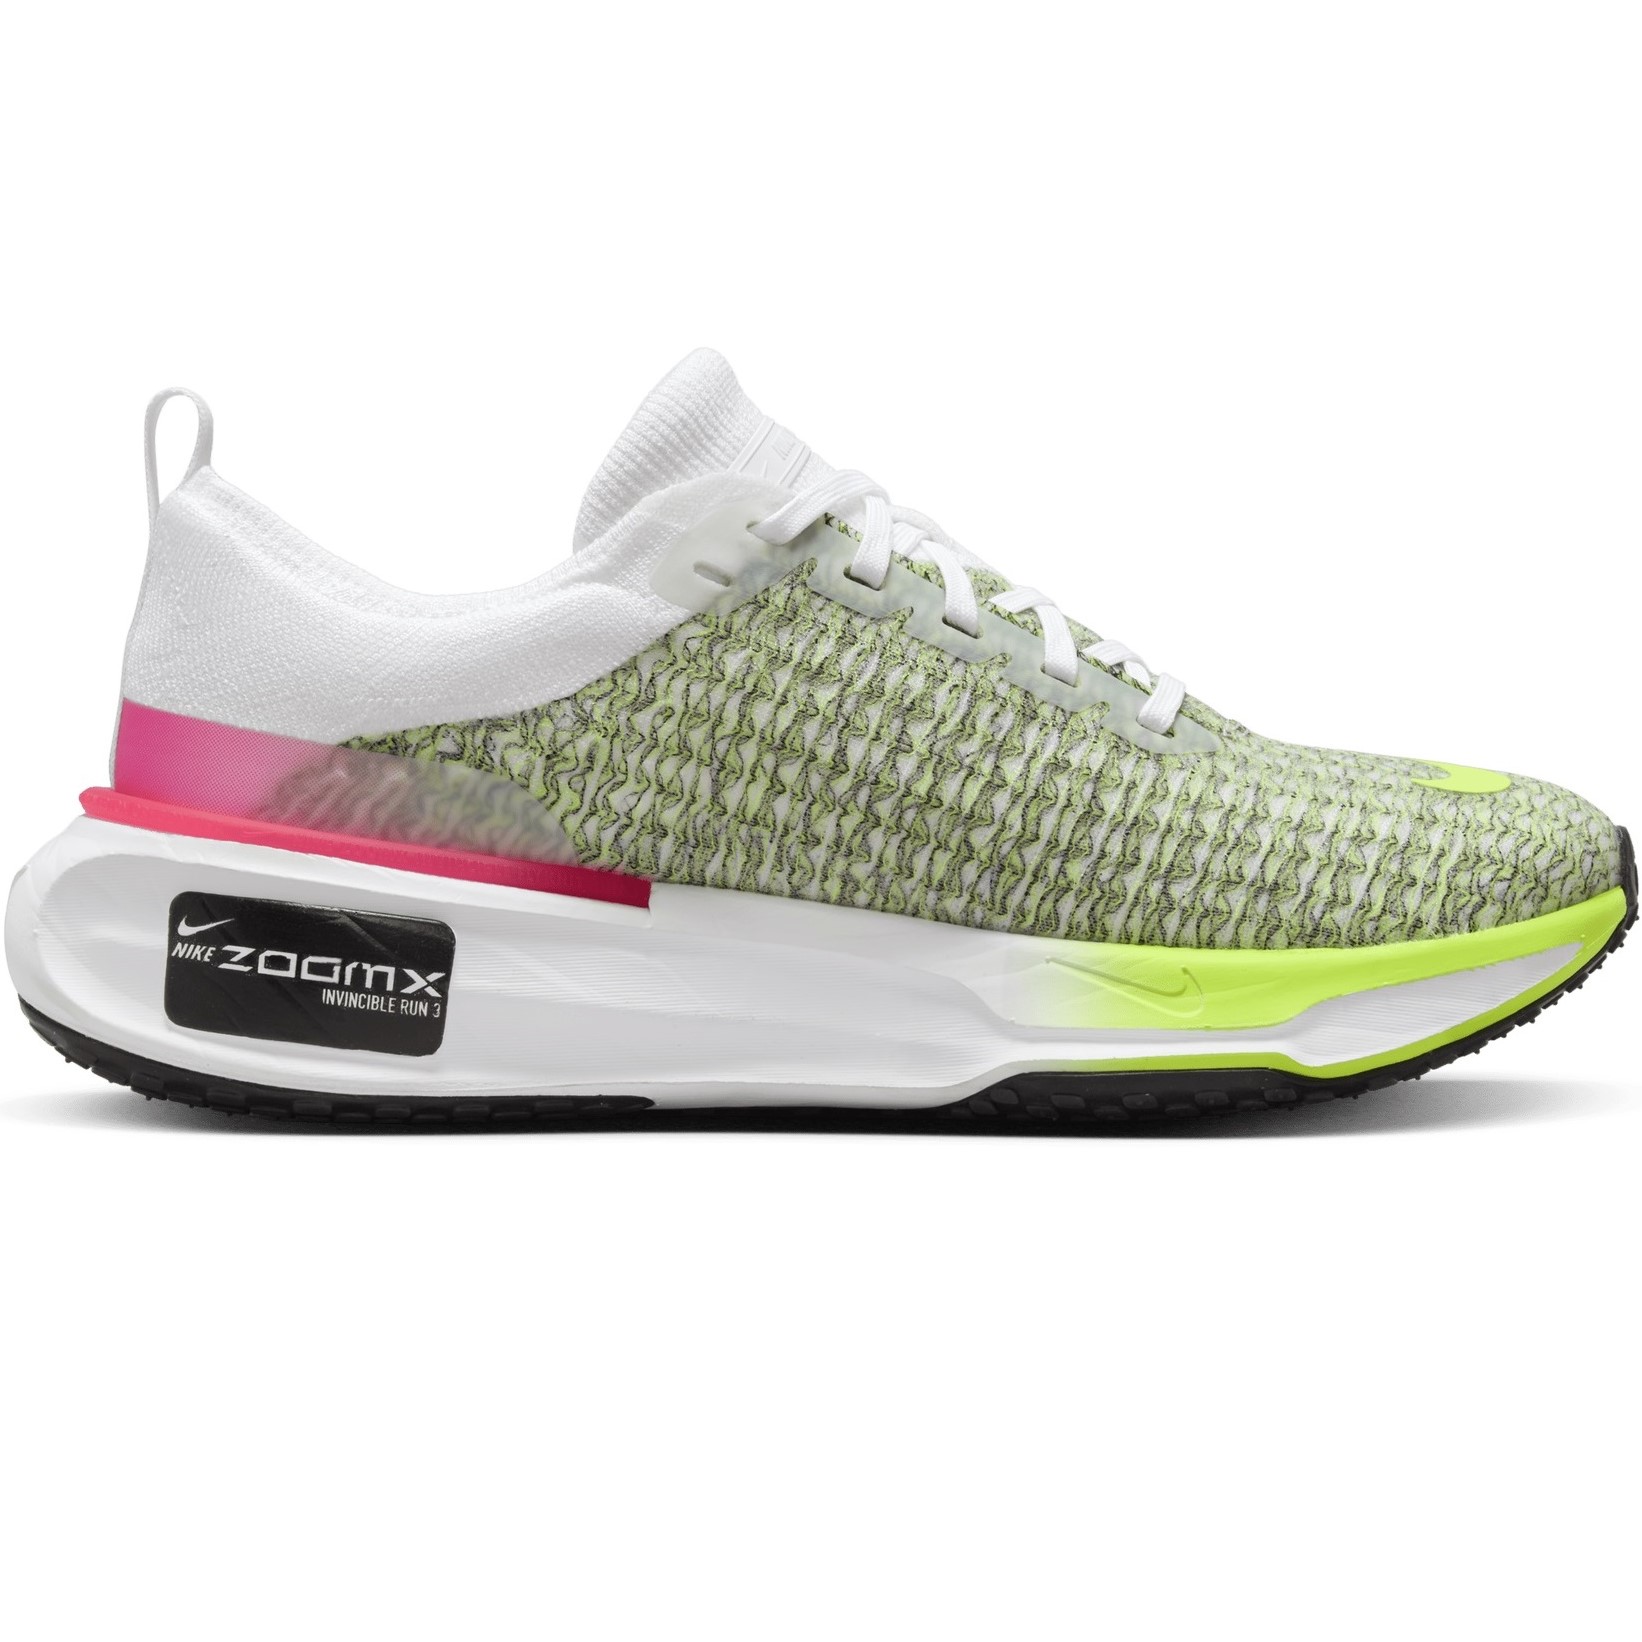 GIÀY CHAY BỘ NIKE NỮ WOMENS ZOOMX INVINCIBLE 3 ROAD RUNNING SHOES WHITE VOLT HYPER PINK FN6821-100 3